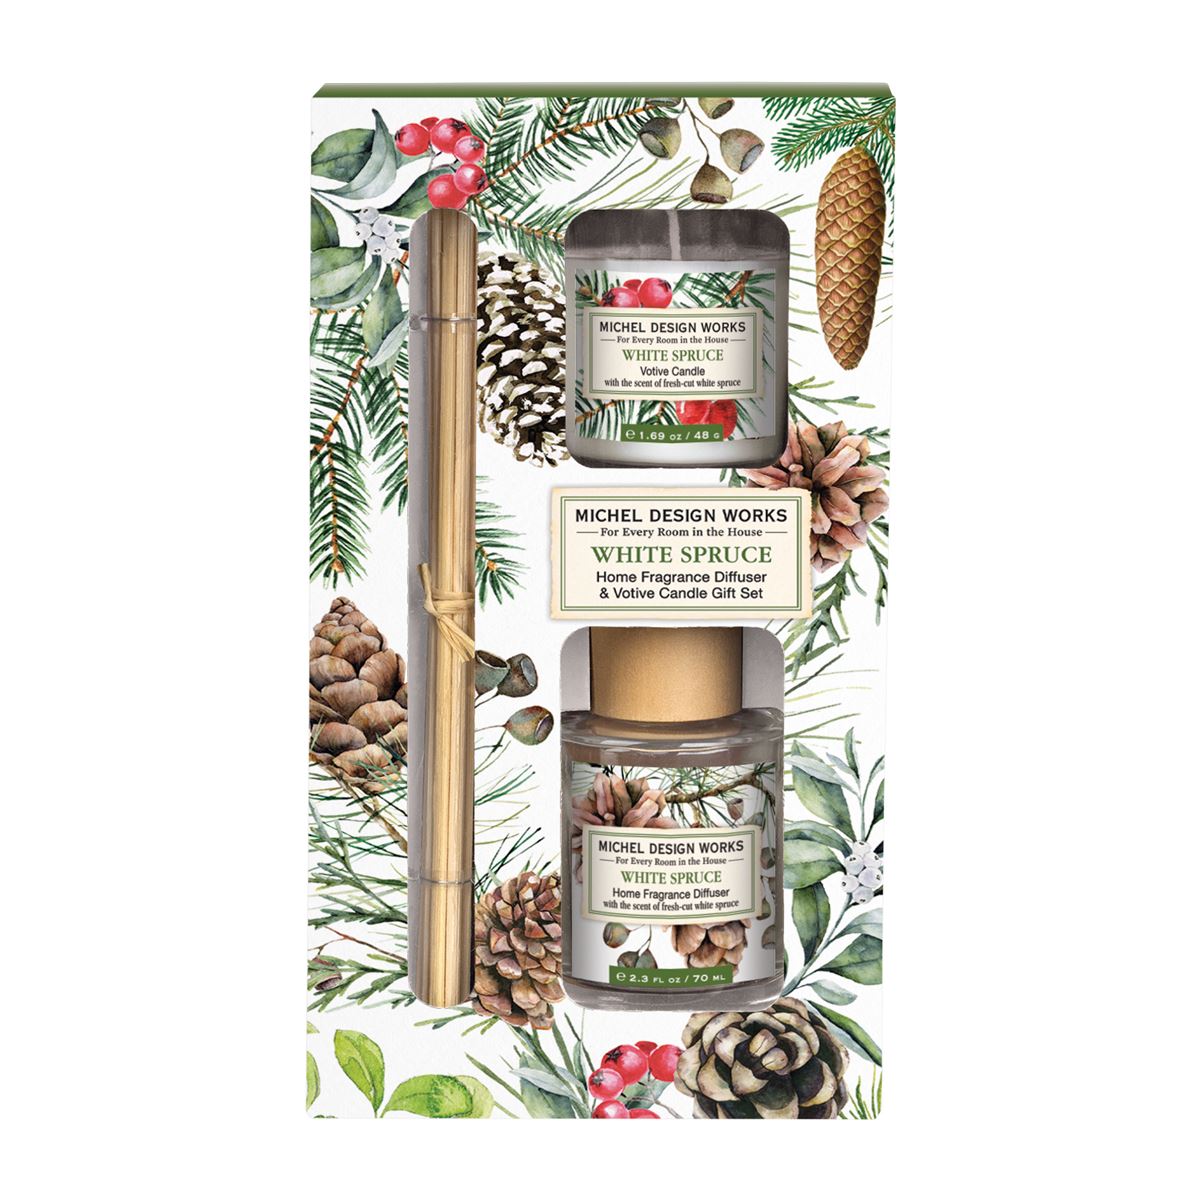 White Spruce Home Fragrance Diffuser & Votive Candle Gift Set